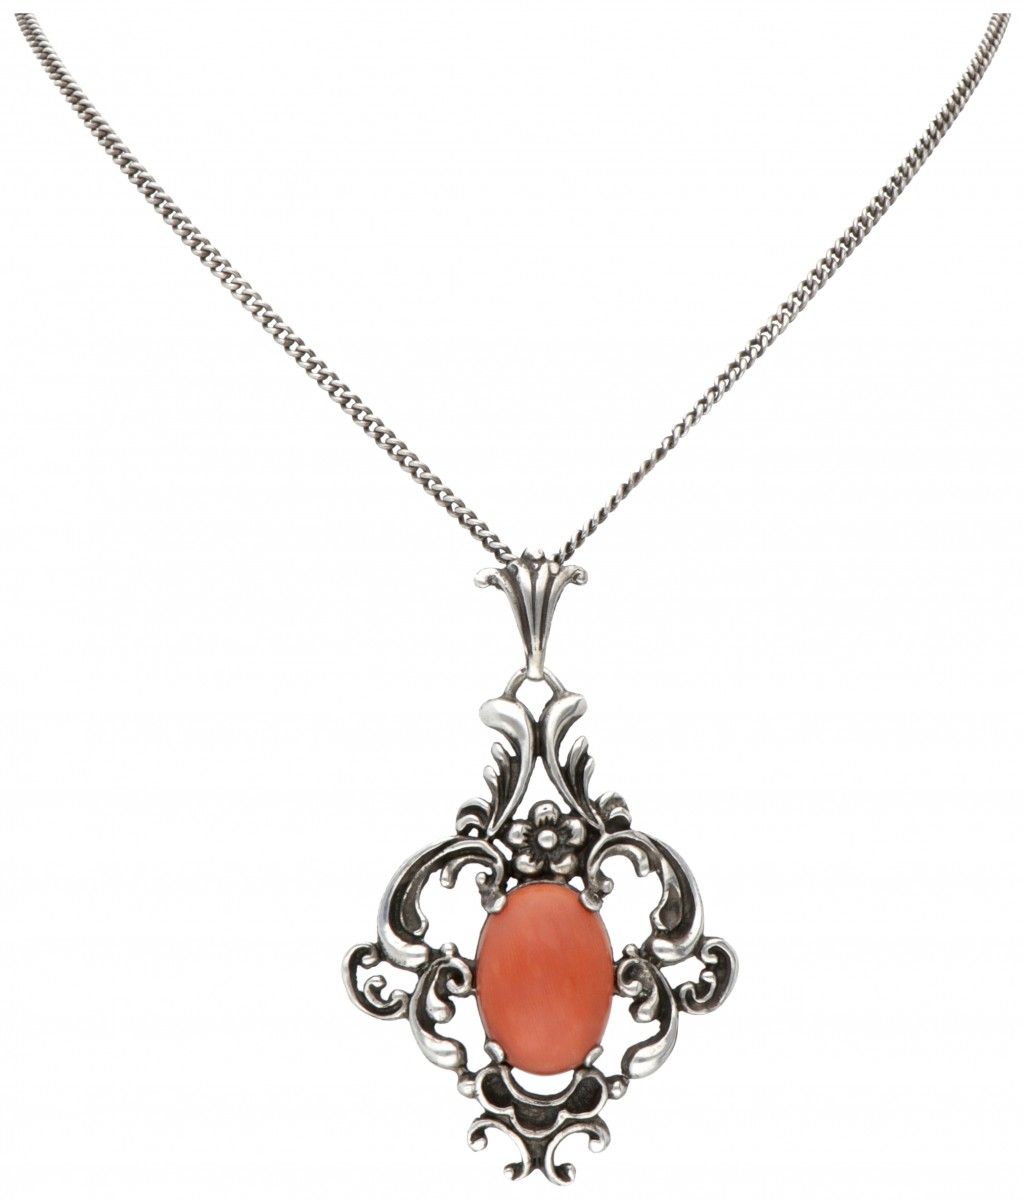 Silver necklace with pendant set with approx. 7.29 ct. Red coral - 835/1000. Mar&hellip;